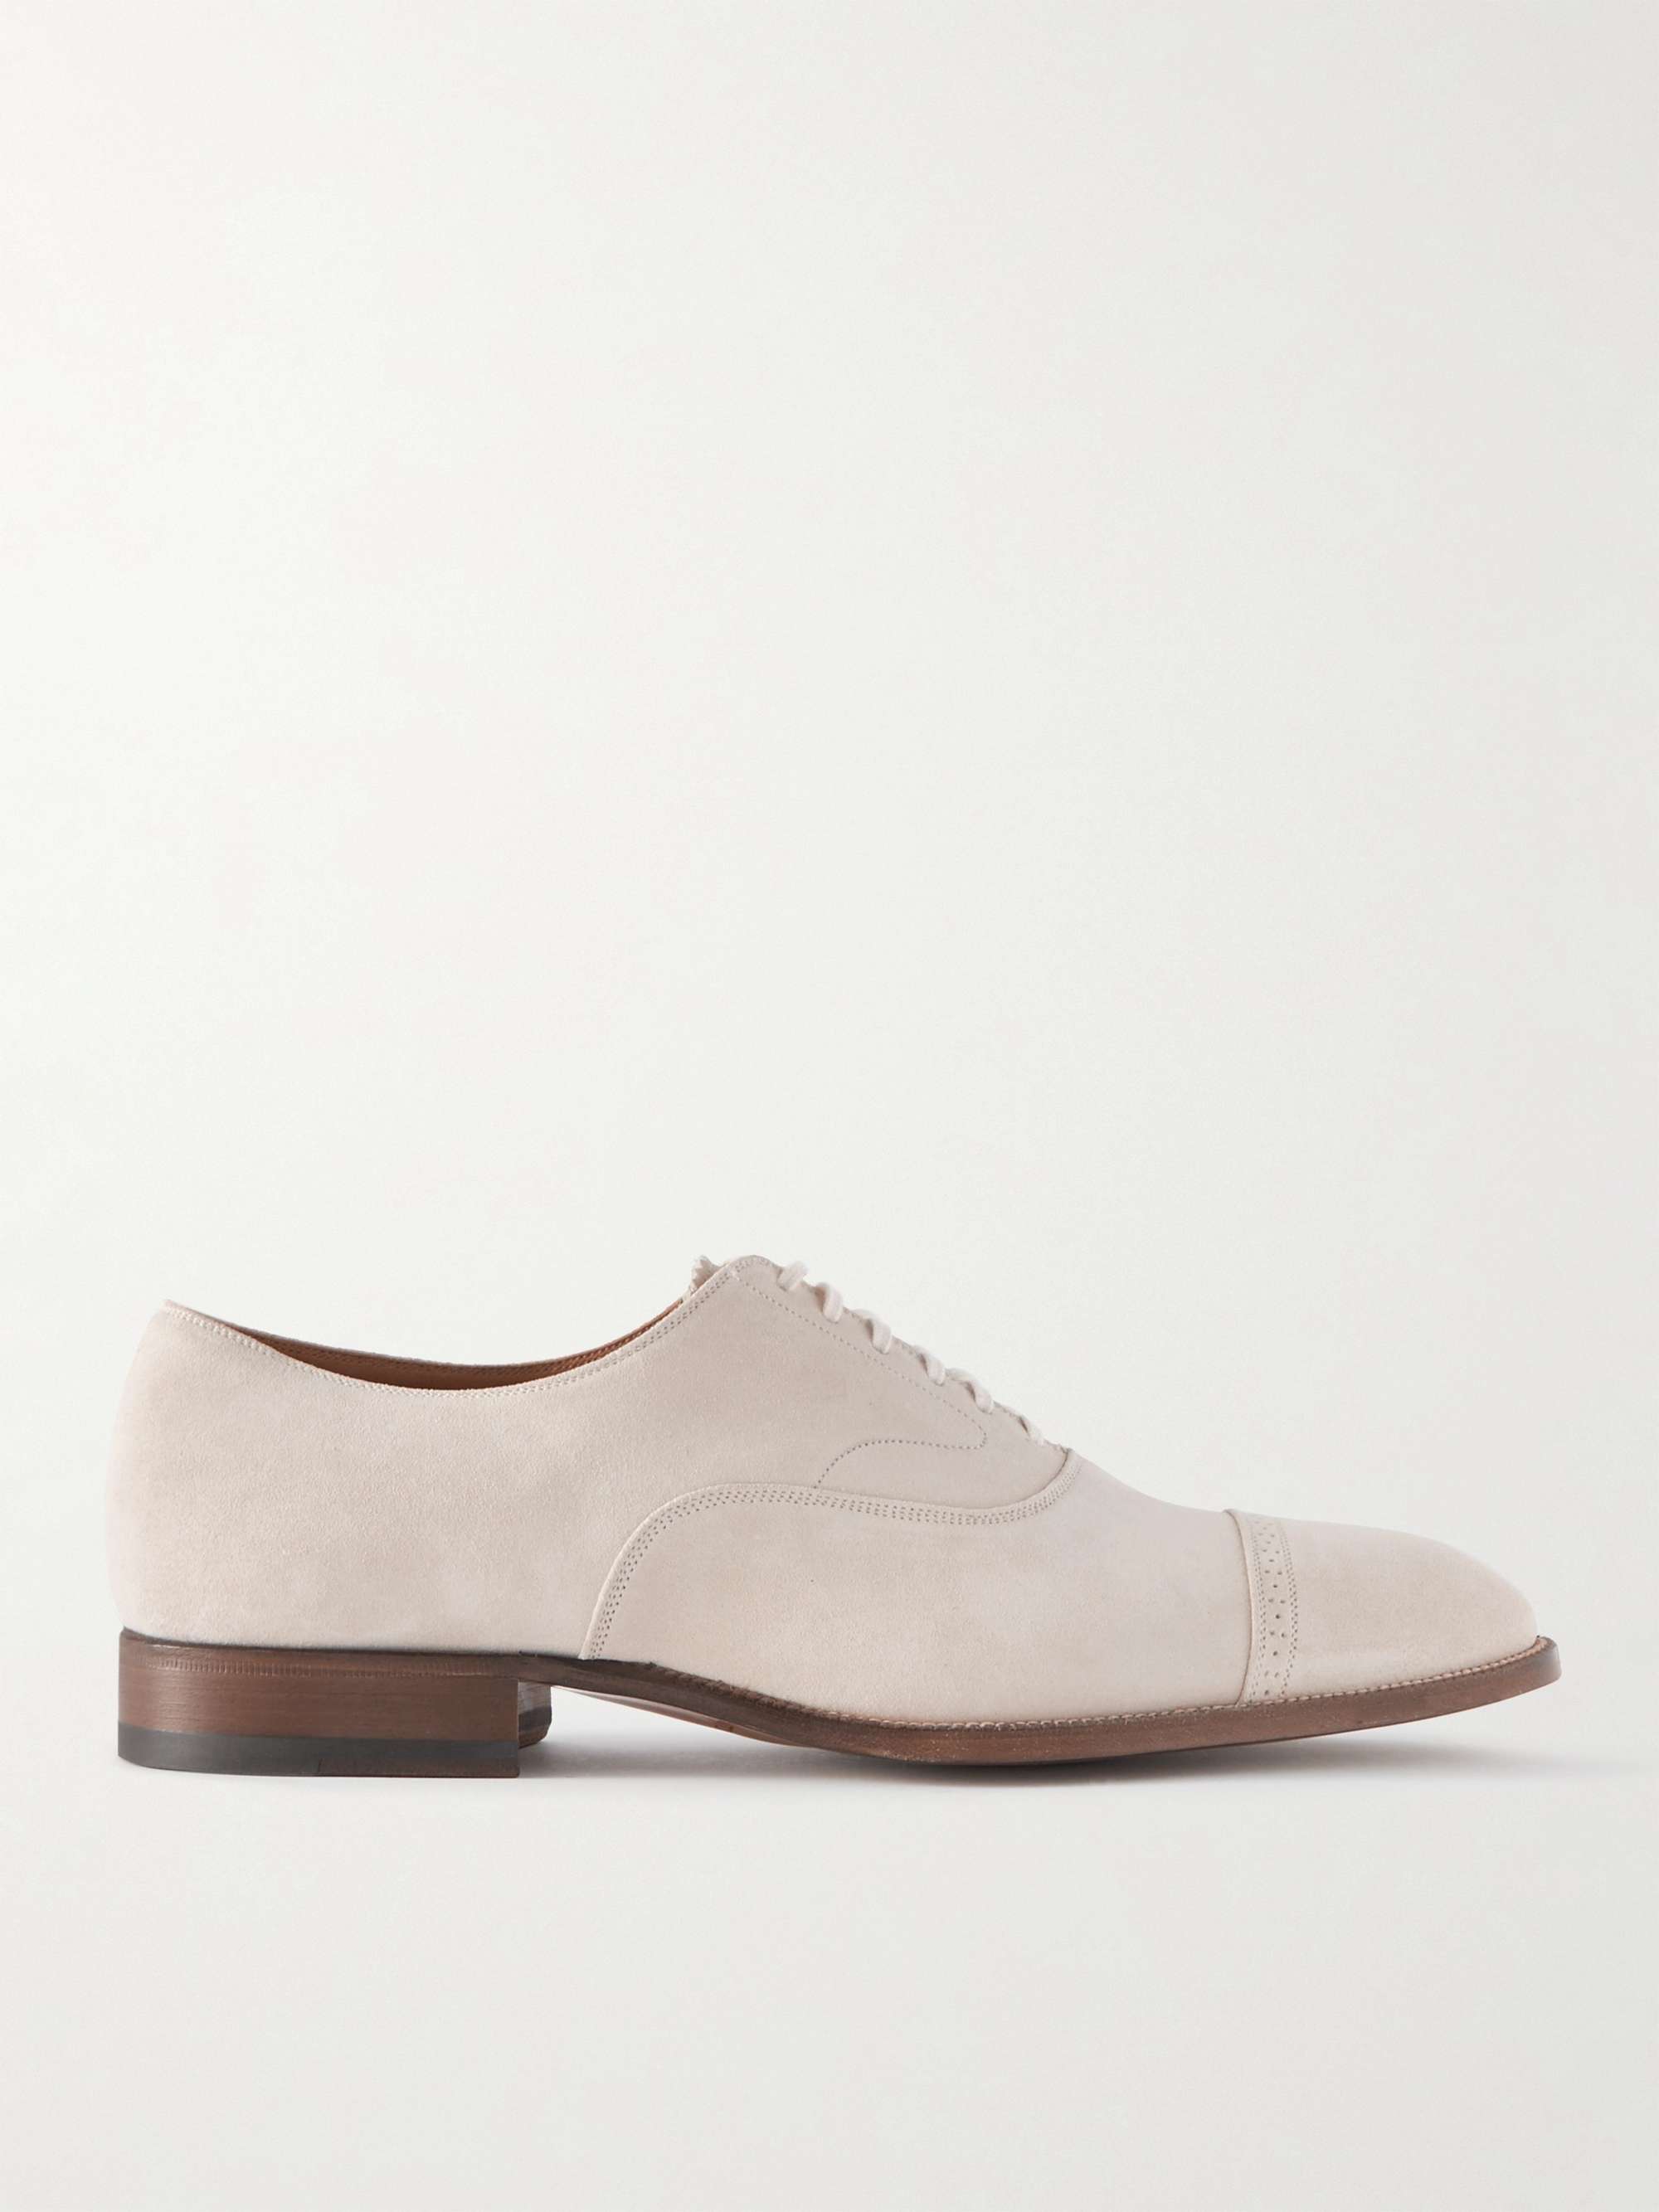 TOM FORD Suede Oxford Brogues